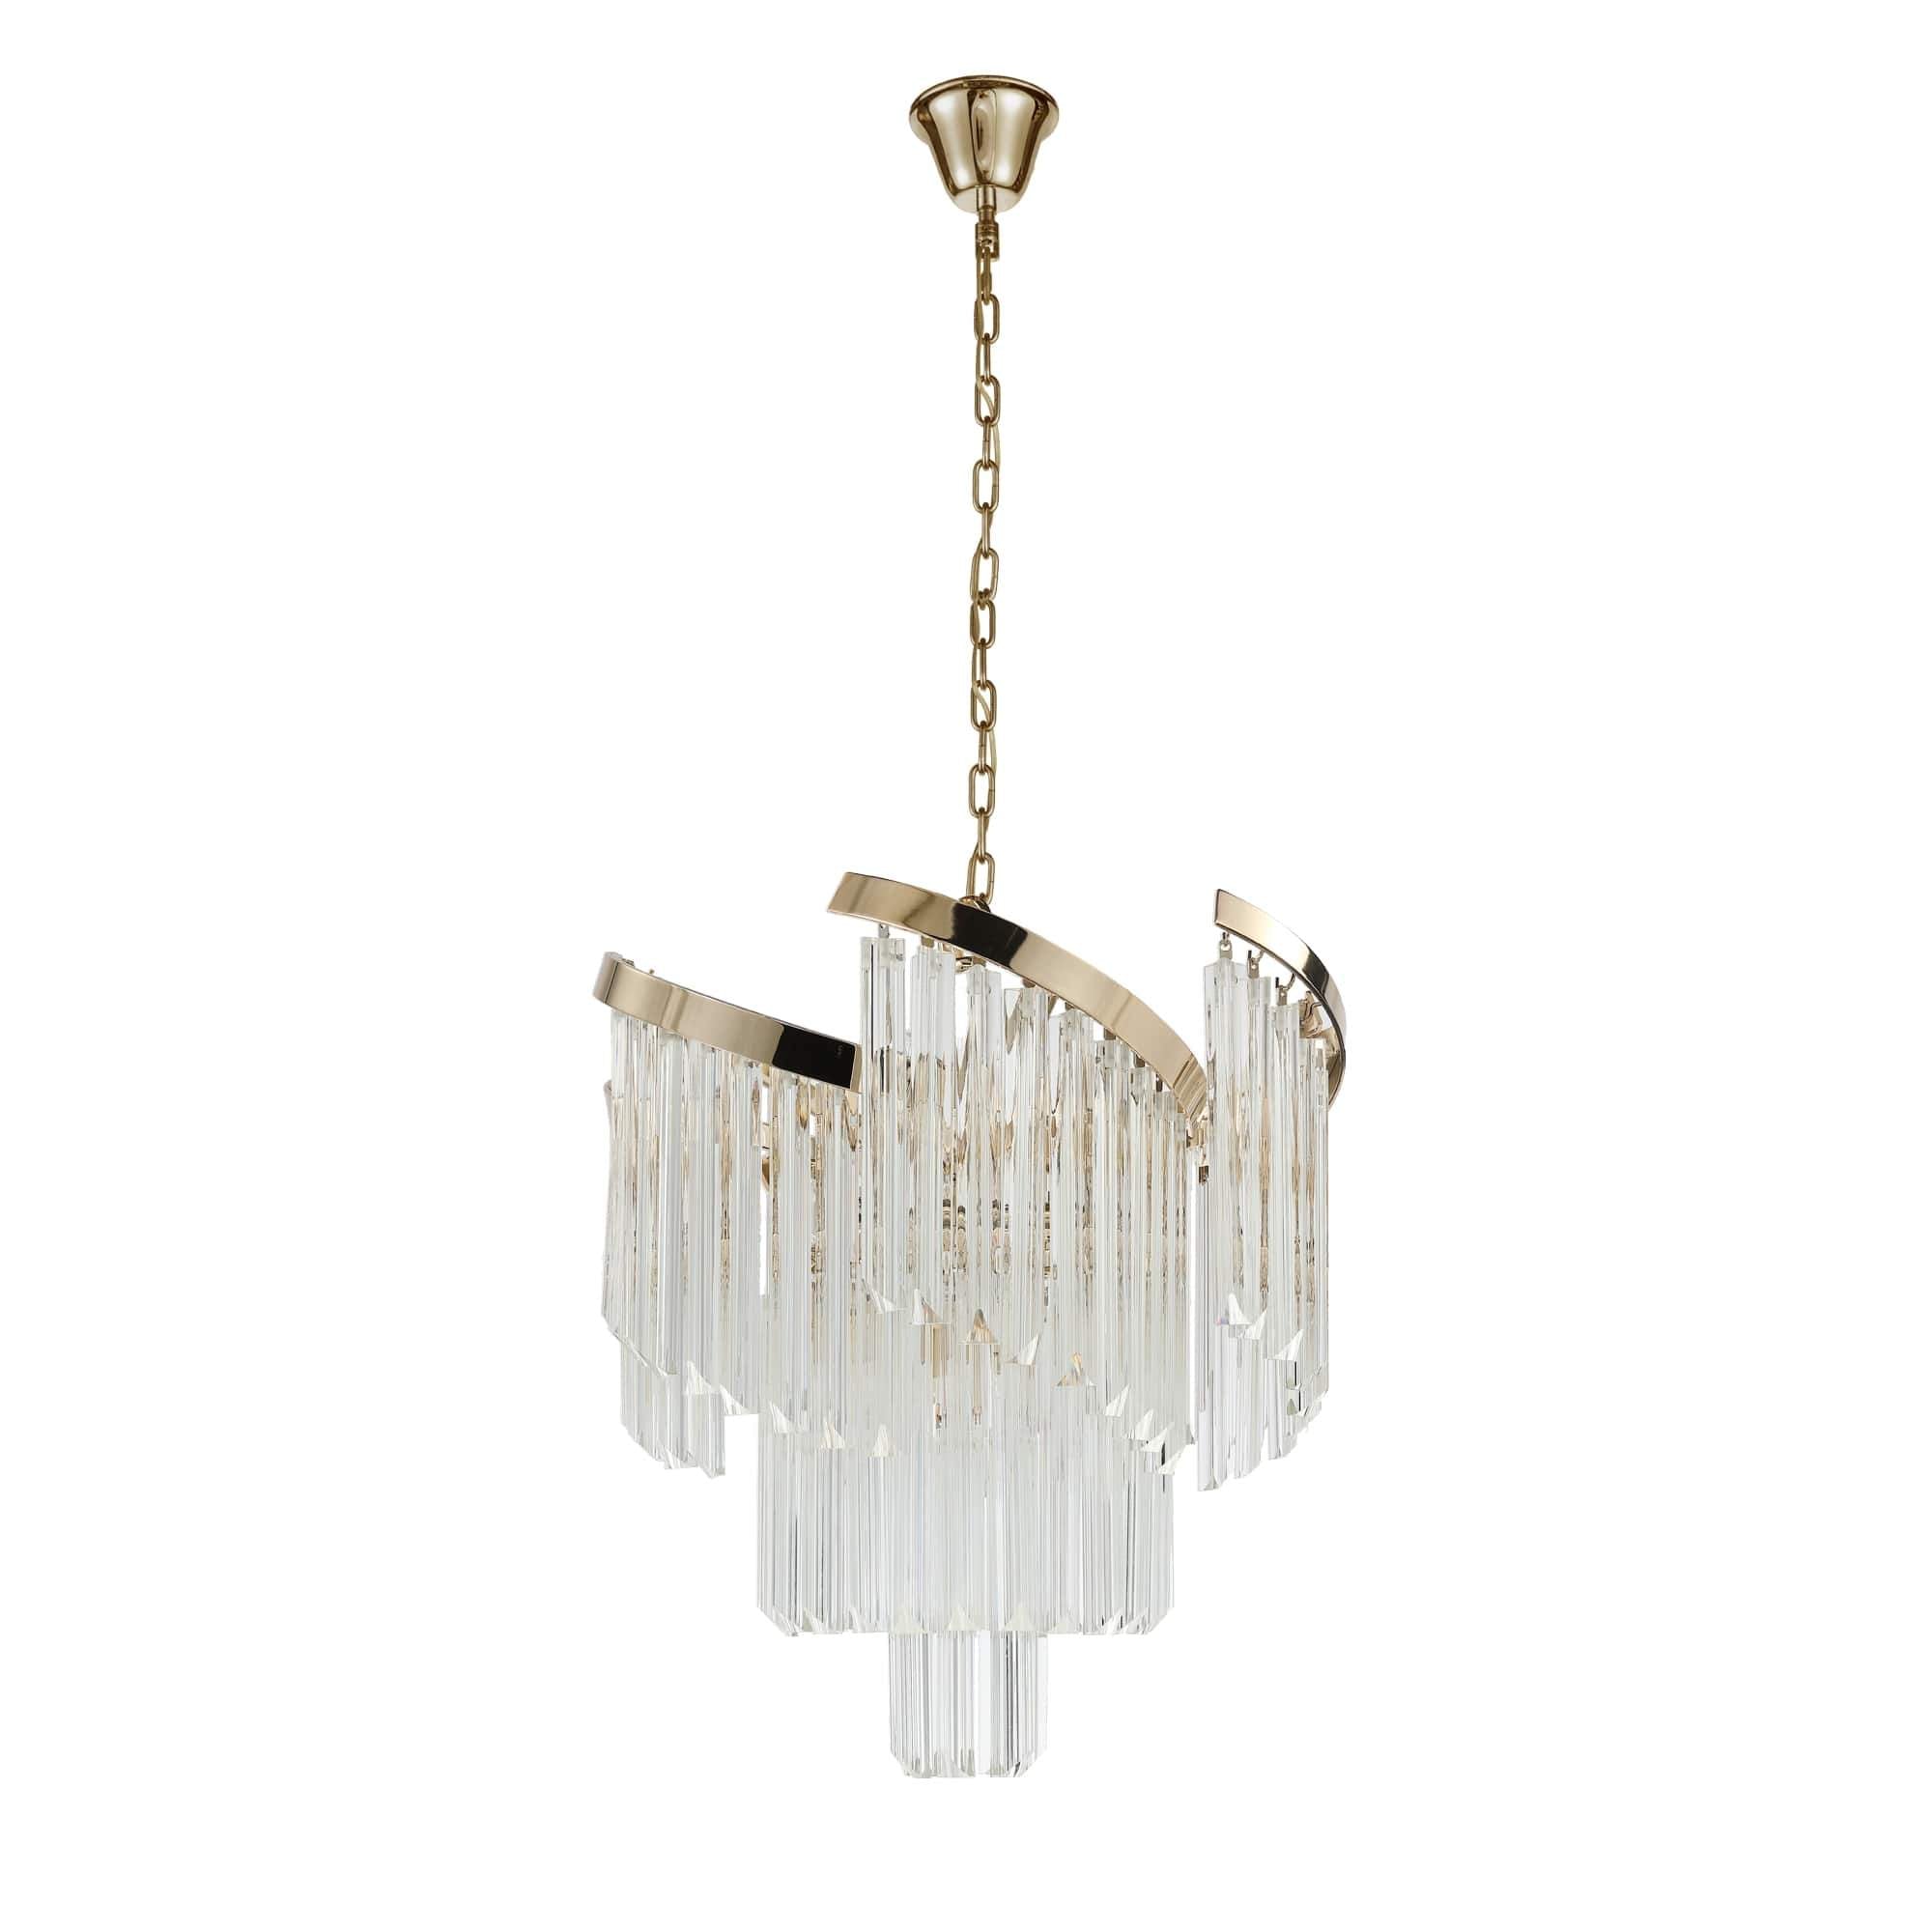 Twin Palms Round Crystal Chandelier - Italian Concept